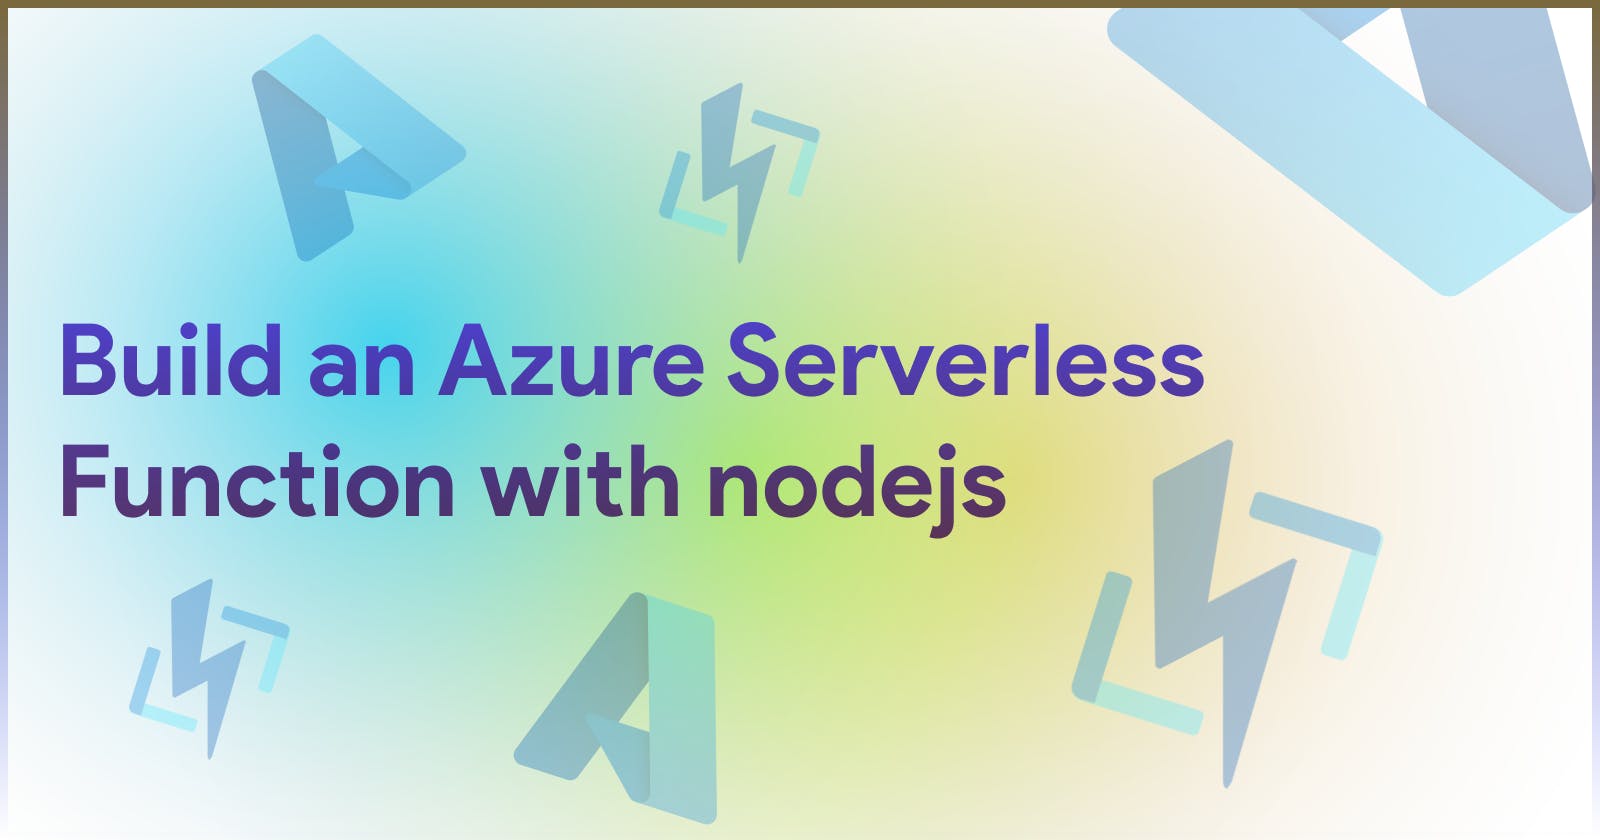 Build an Azure Serverless Function with nodejs
and test locally